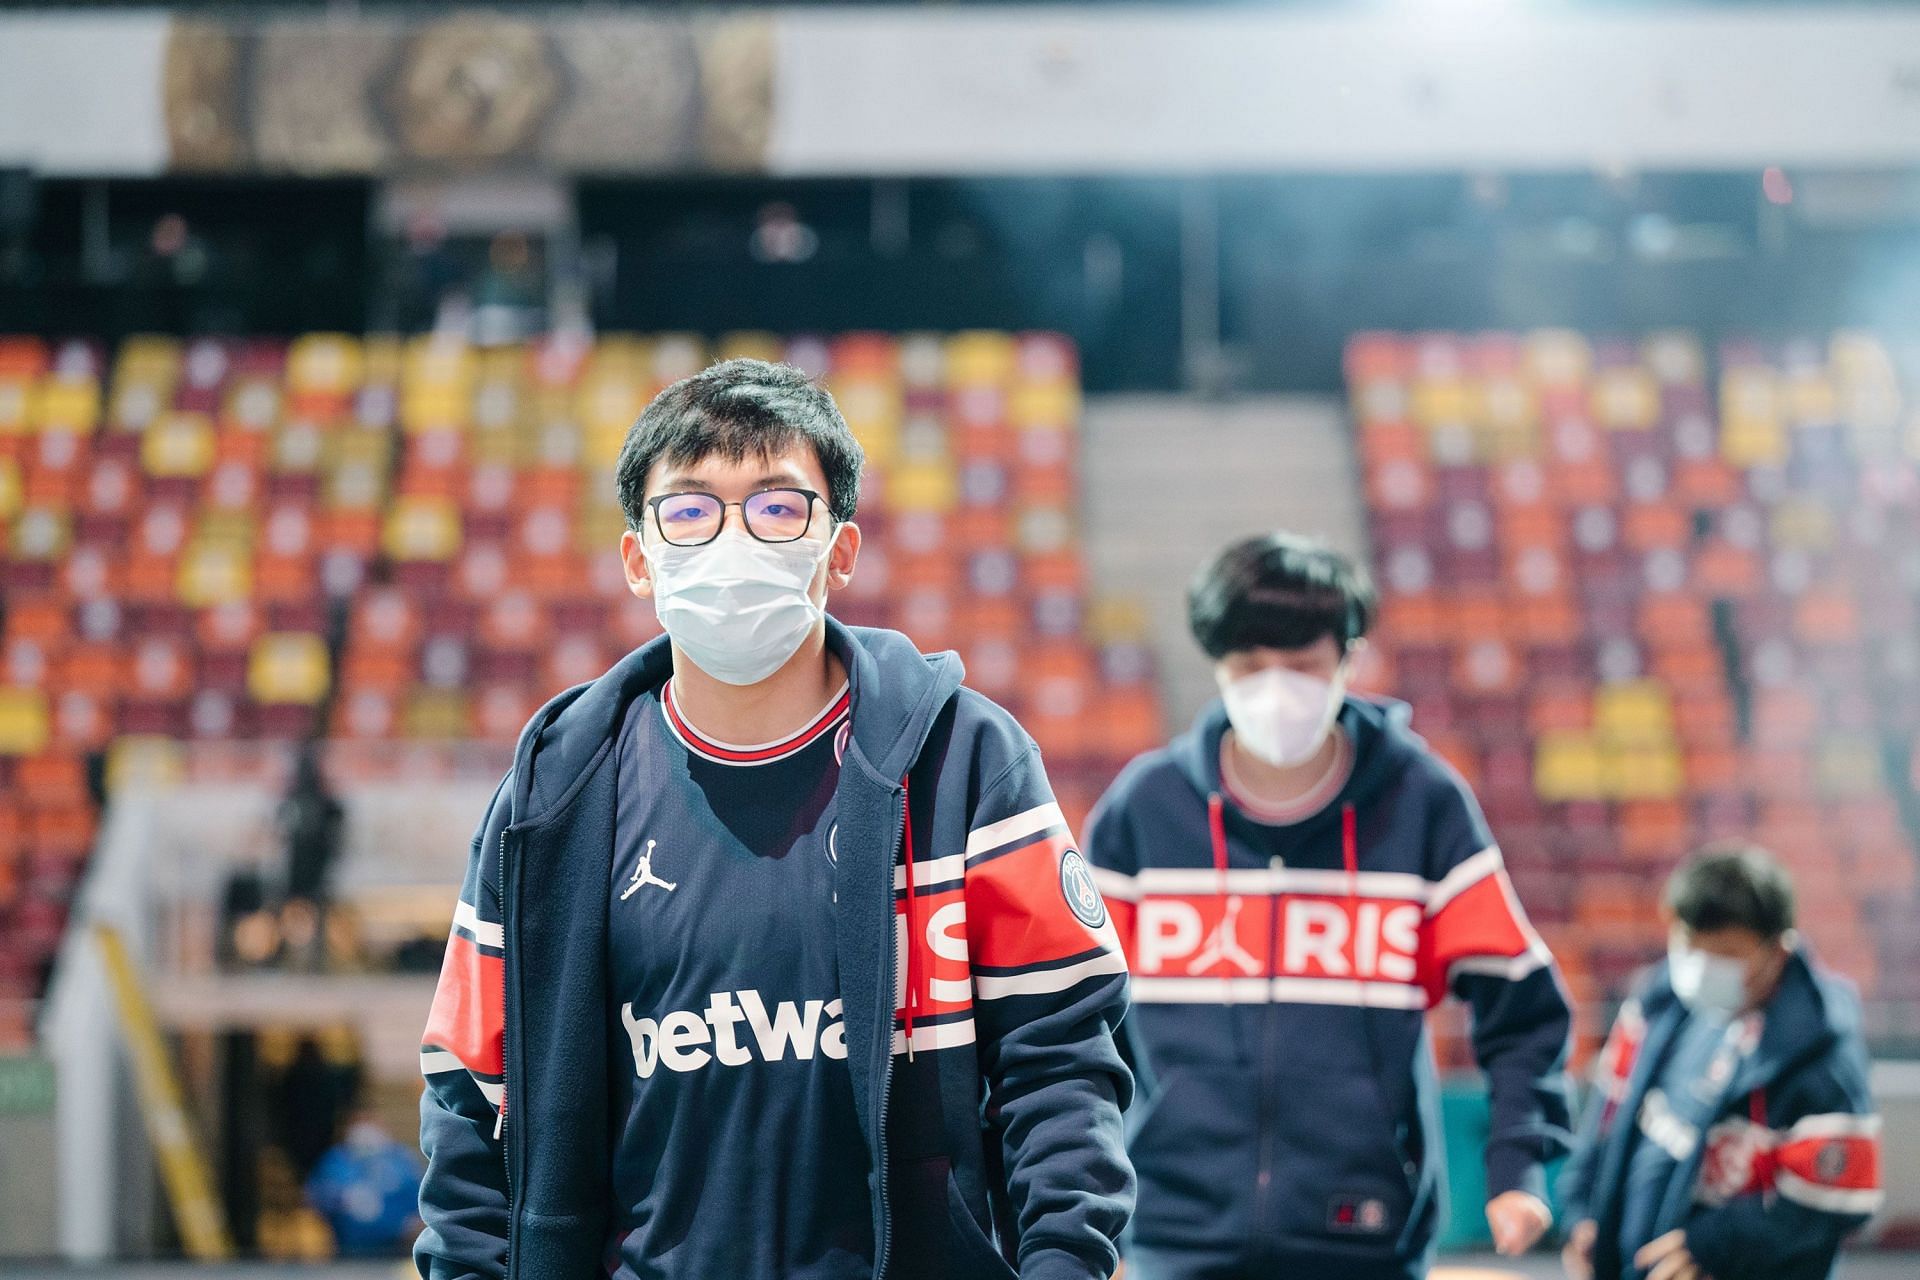 PSG.LGD Dota 2 coach xiao8 allegedly bet against his own team, his ex